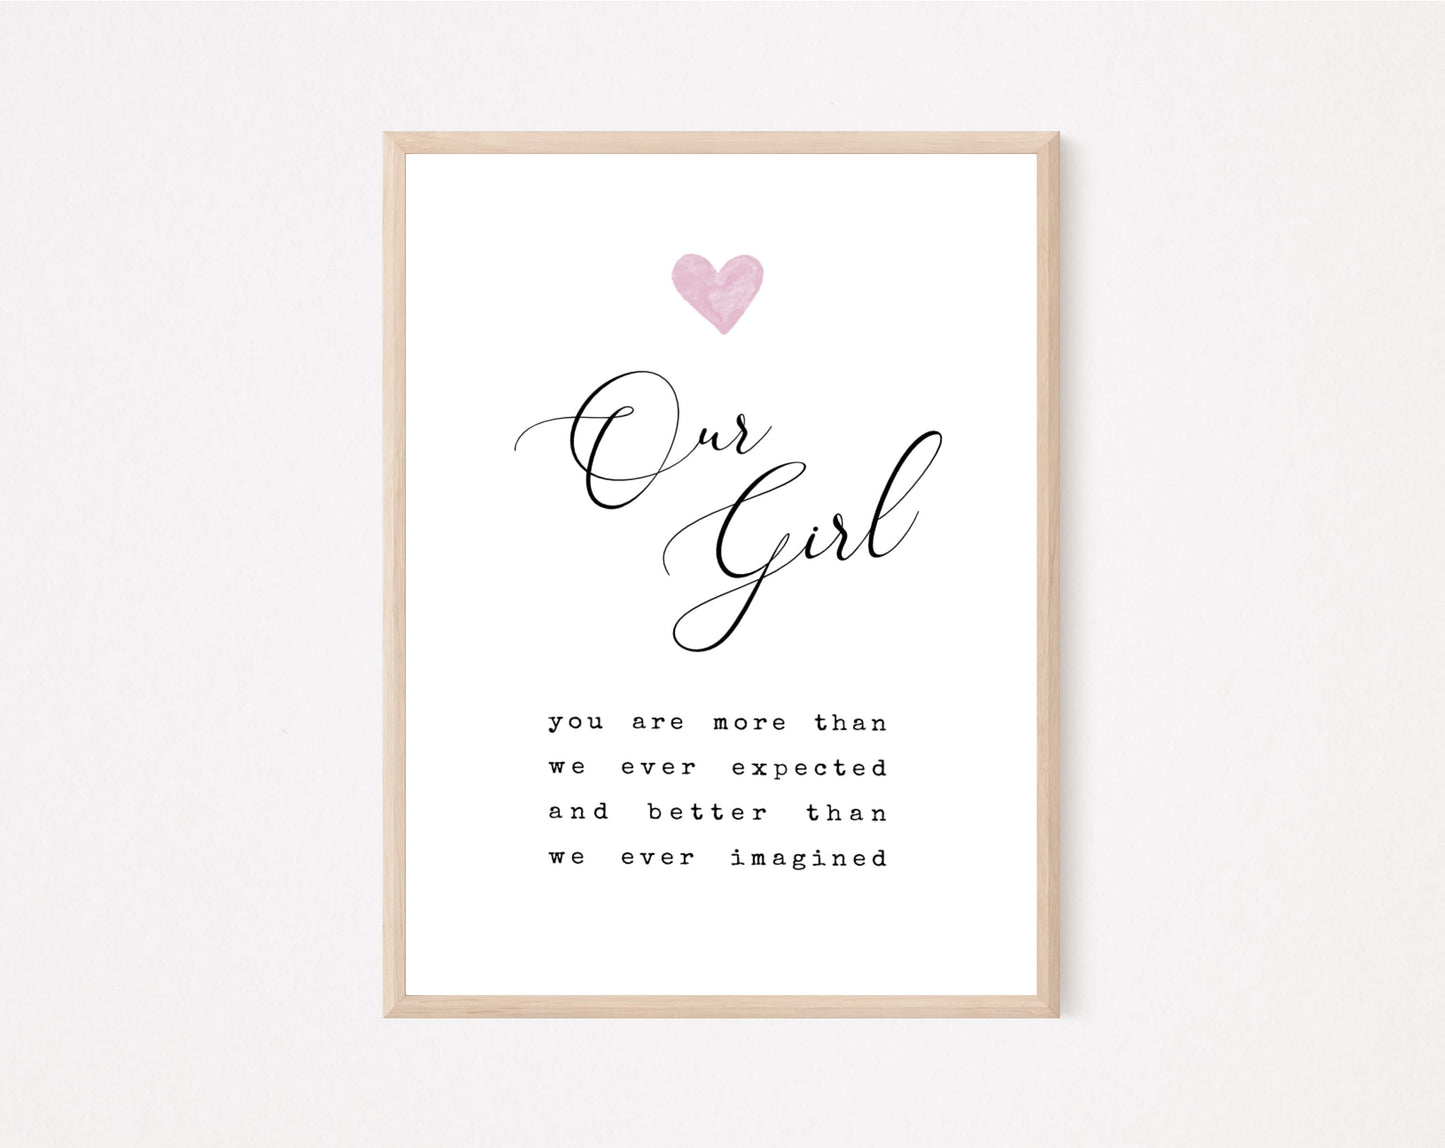 A little girl’s room digital print that has a pink heart at the top, and a piece of writing that says: “Our girl, you are more than we ever expected and better than we ever imagined.”